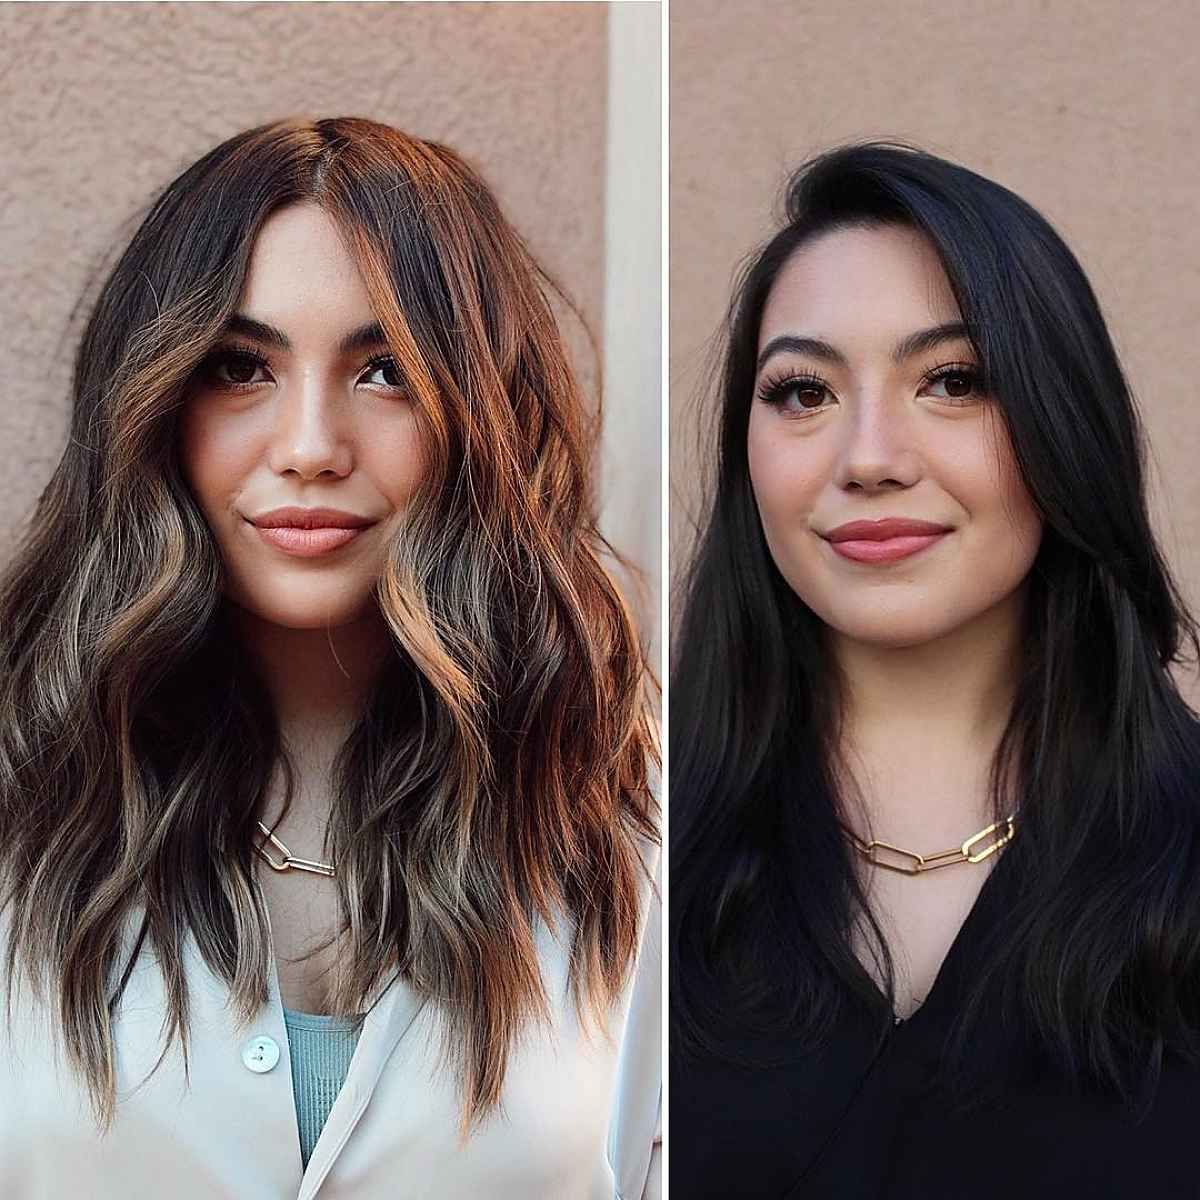 Best And Newest Middle Parted Medium Length Hairstyles Pertaining To 43 Flattering Middle Part Hairstyles Trending Right Now (View 9 of 20)